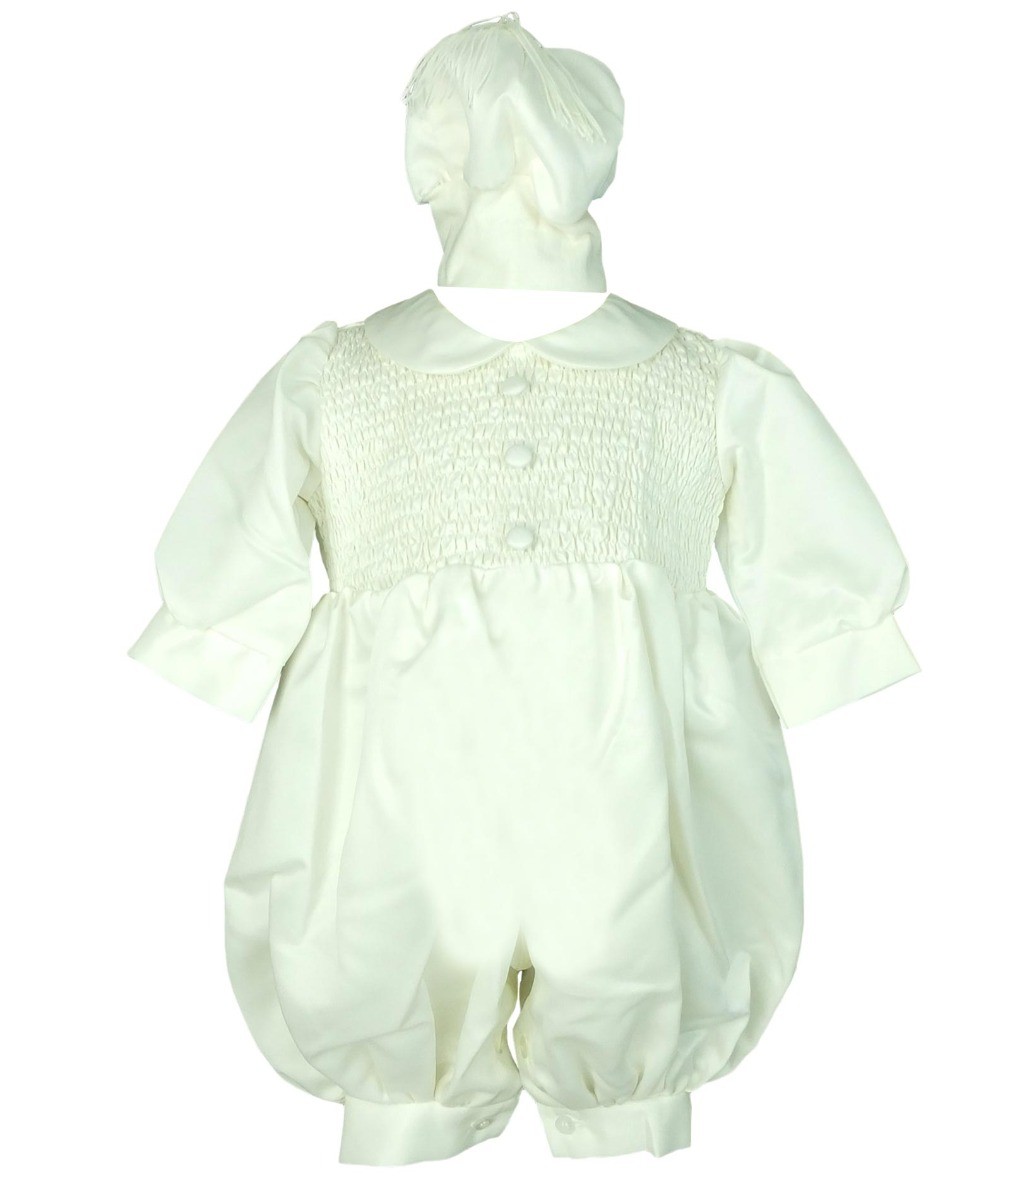 Baby Boys Jumpsuit Christening Baptism Outfit - Ivory